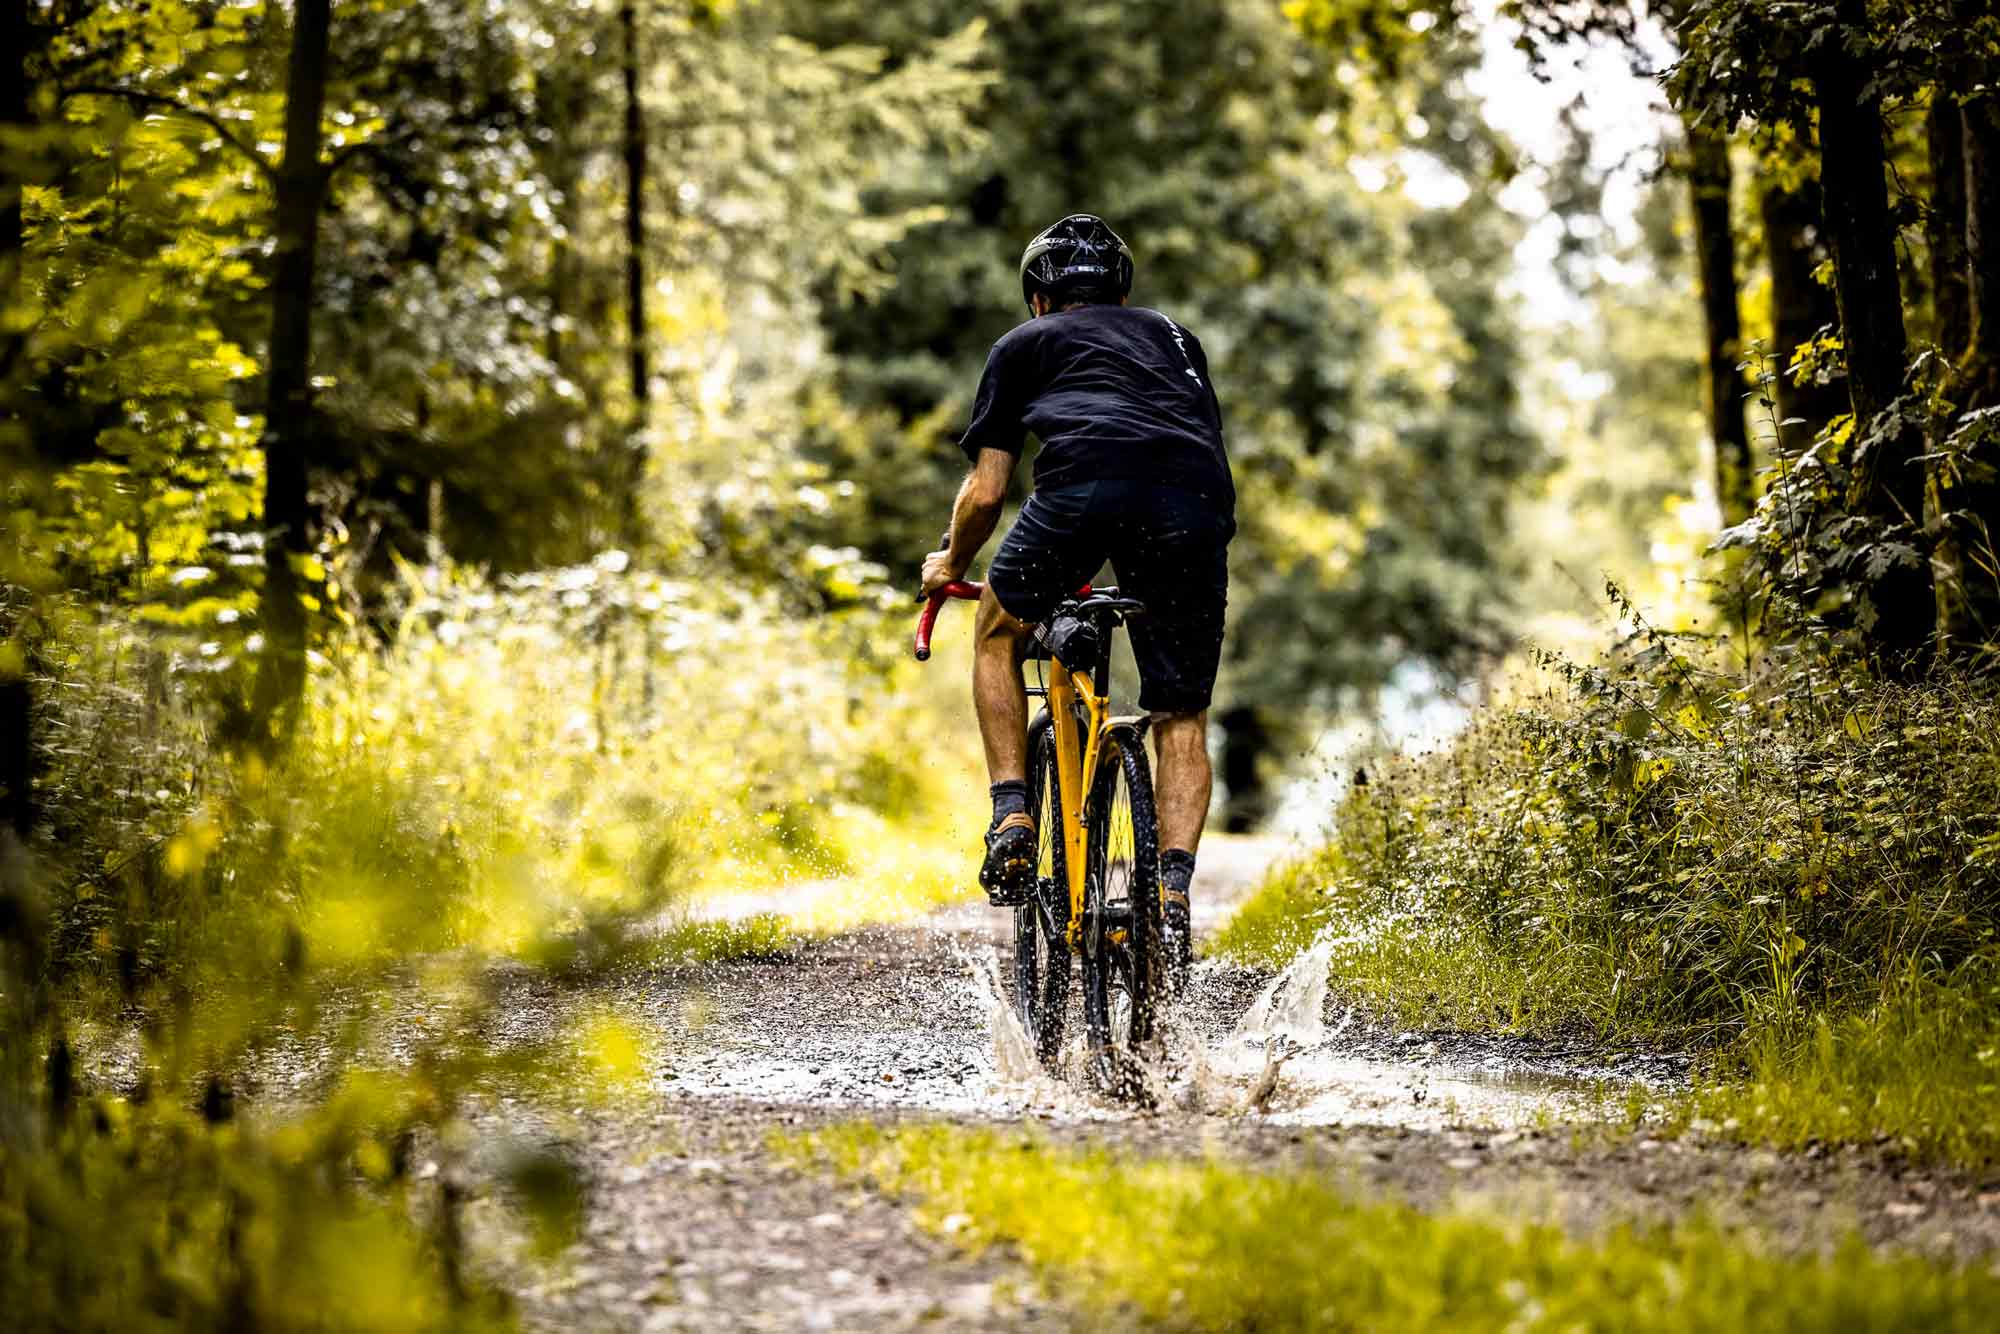 The conditions for our maxxis gravel tyre test were a bit special considering the fact that it's summer...